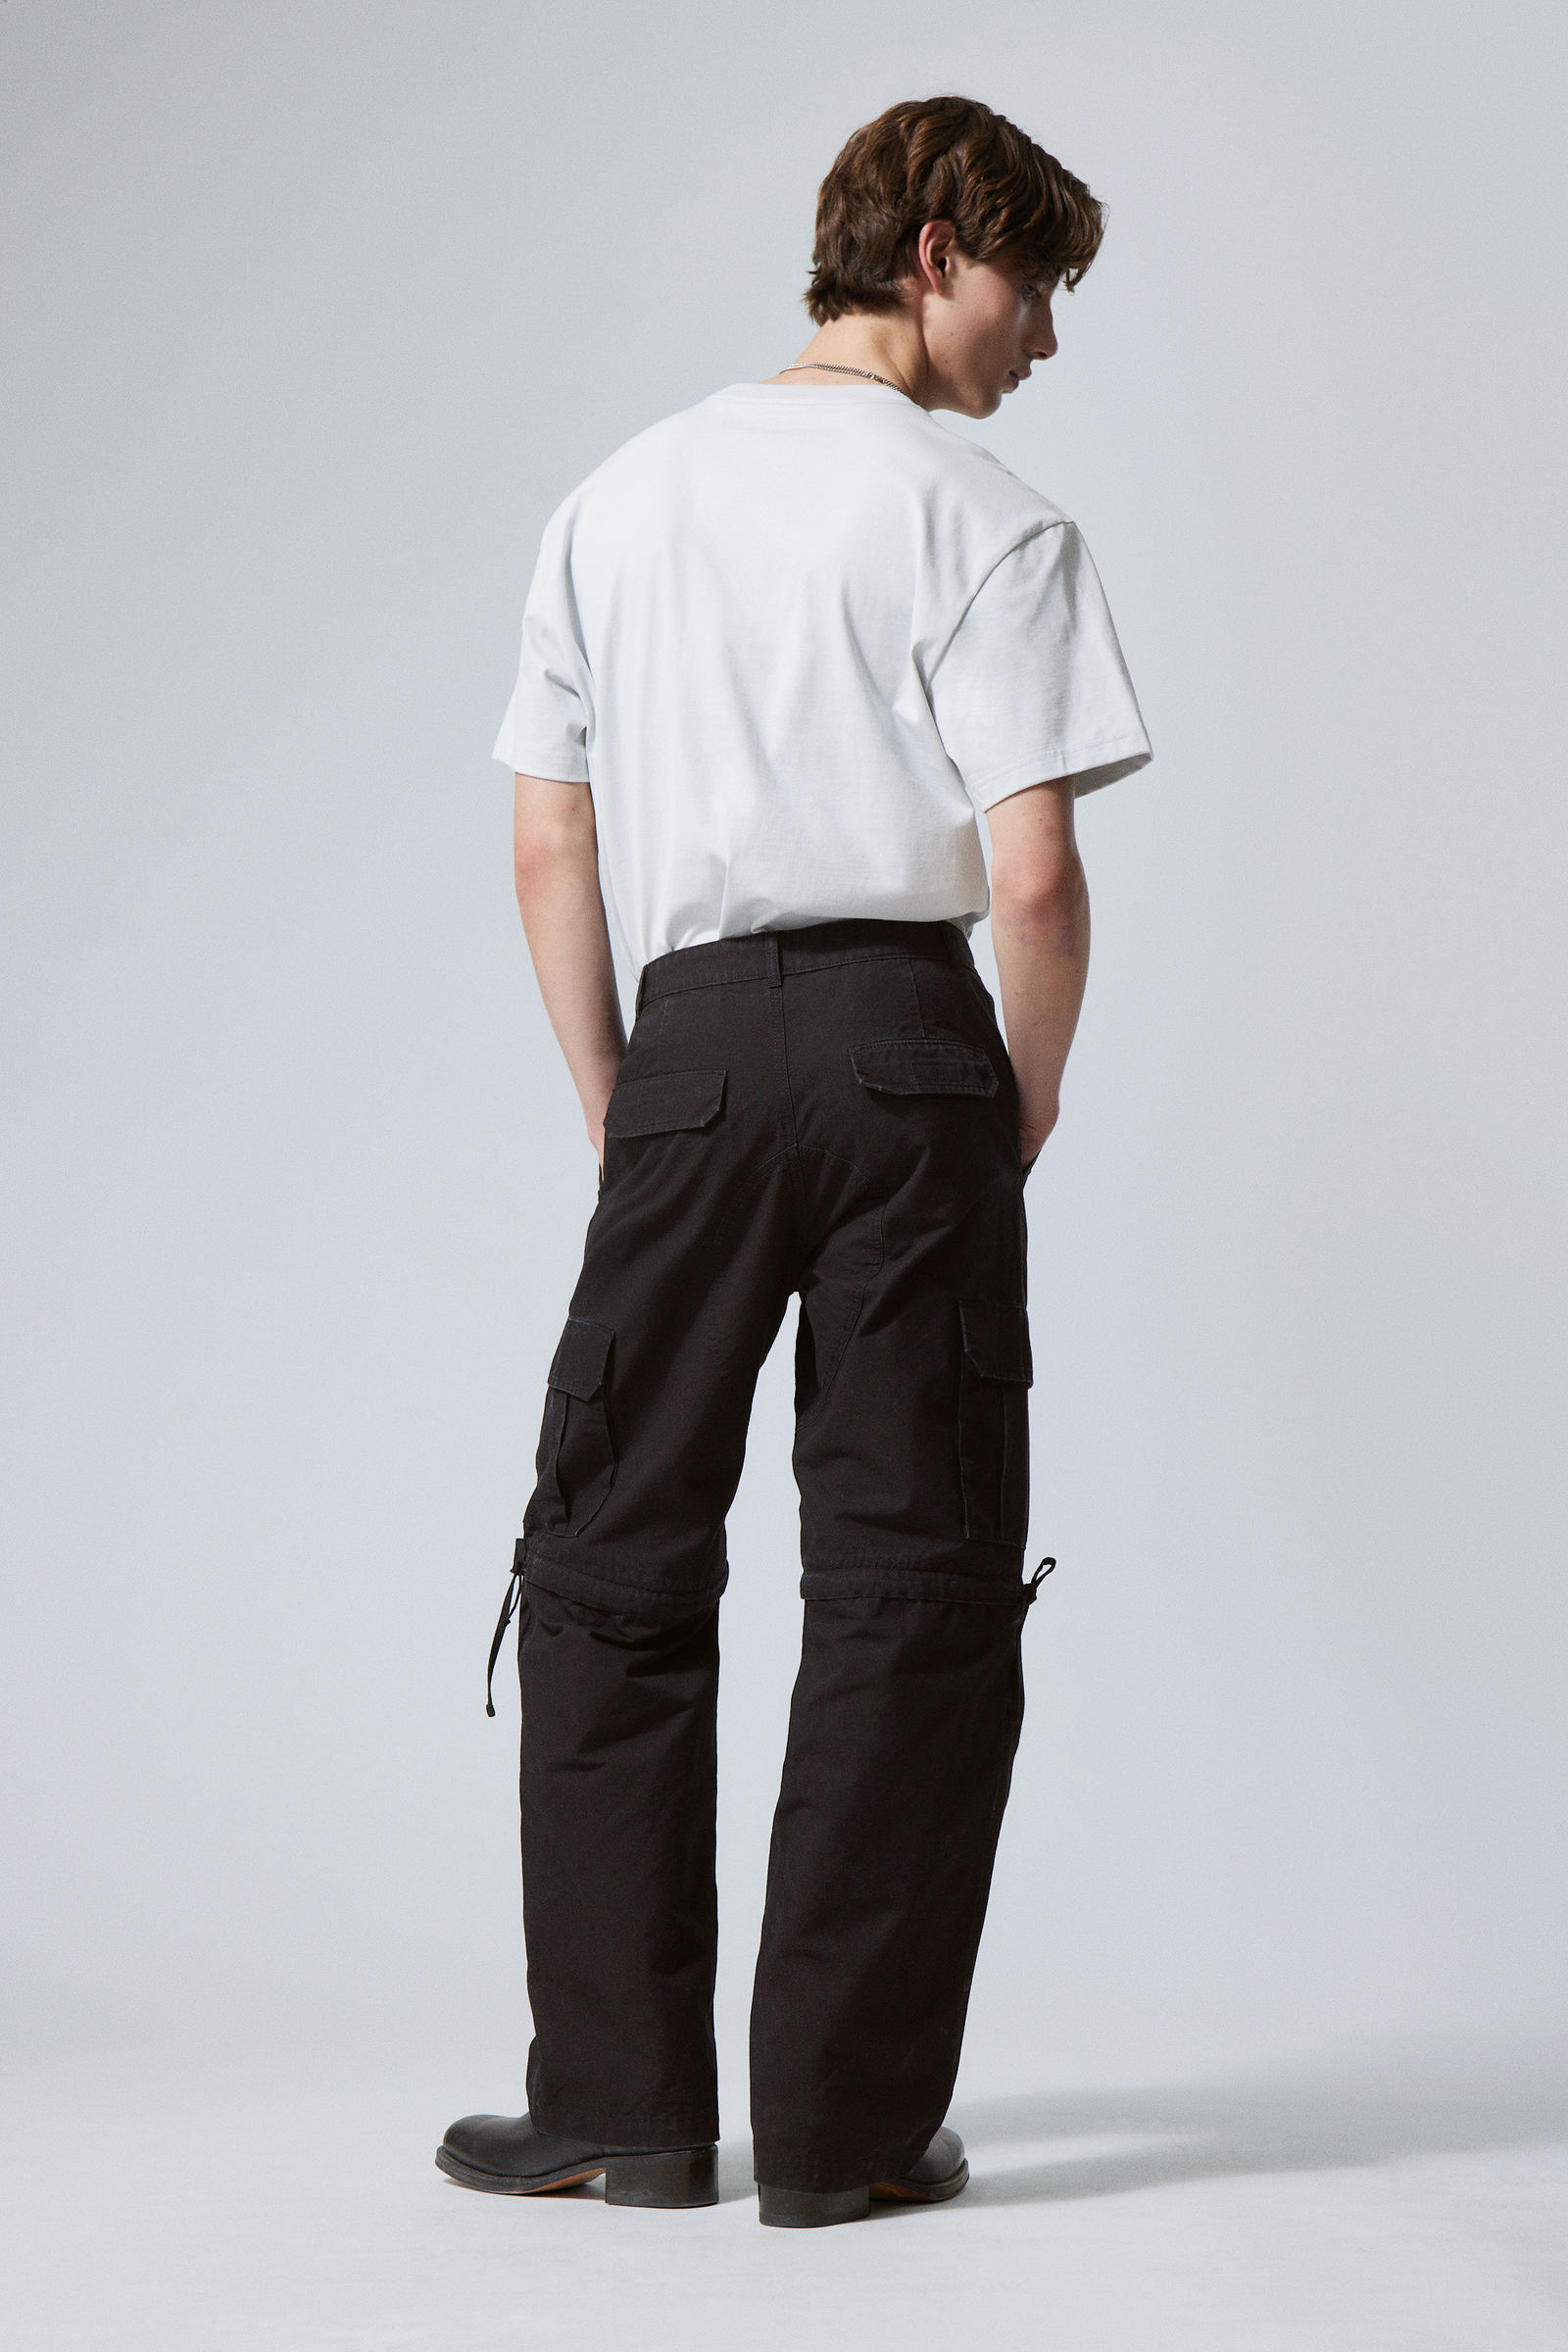 Buy Roadster Men Black Sustainable Trousers - Trousers for Men